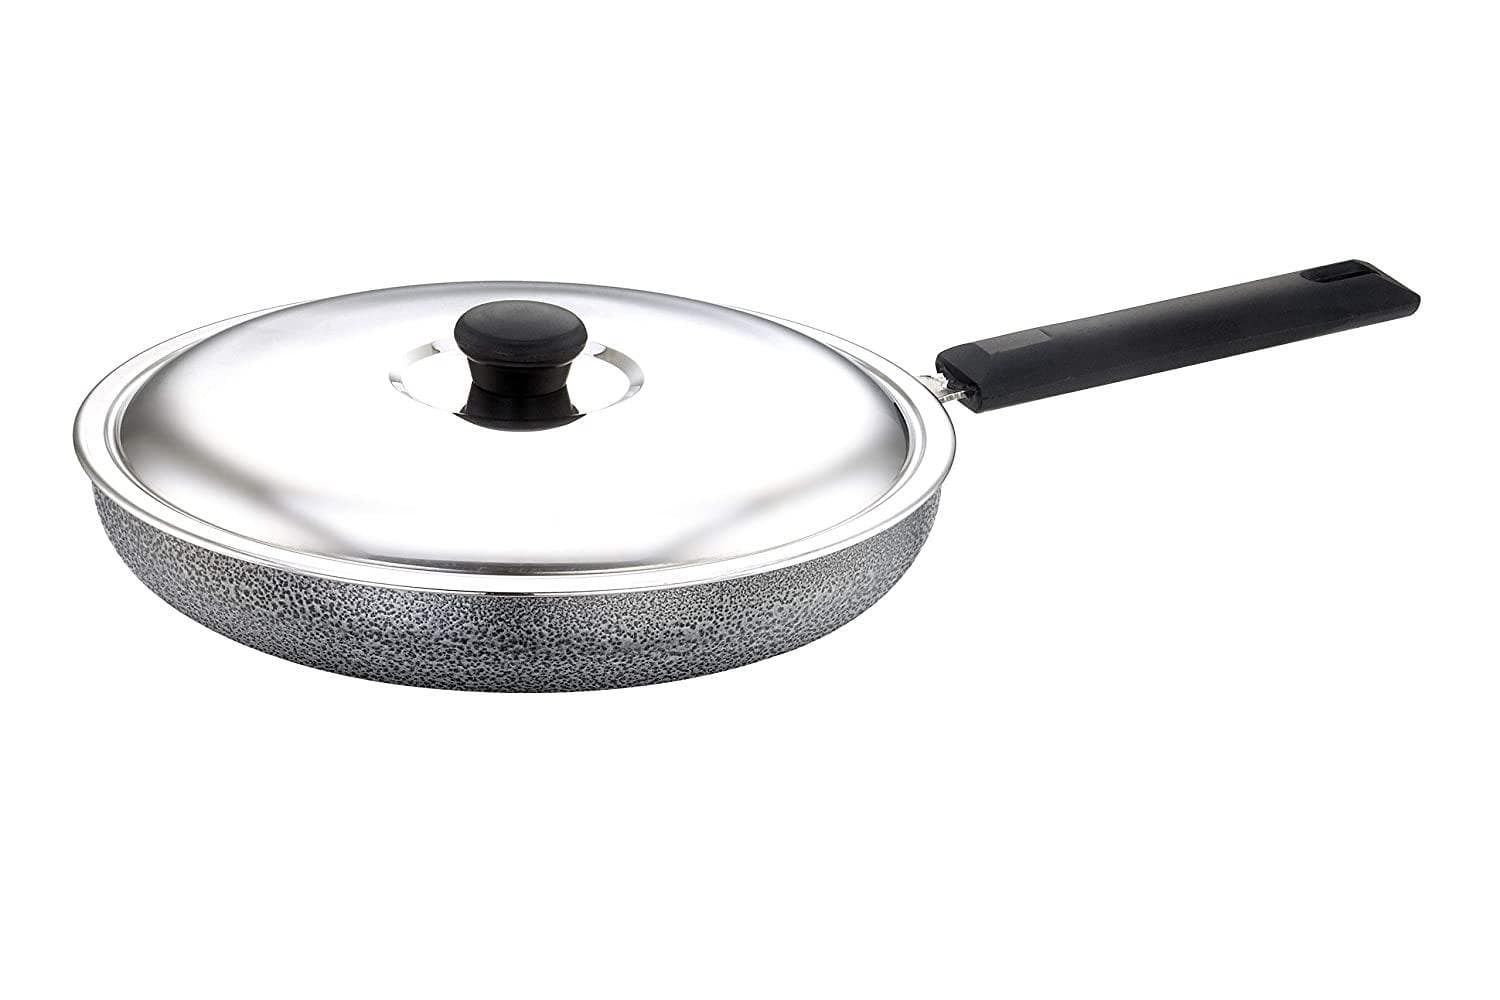 Sowbaghya Non Stick Fry Pan with Stainlees Steel Lid-Home & Kitchen Appliances-dealsplant